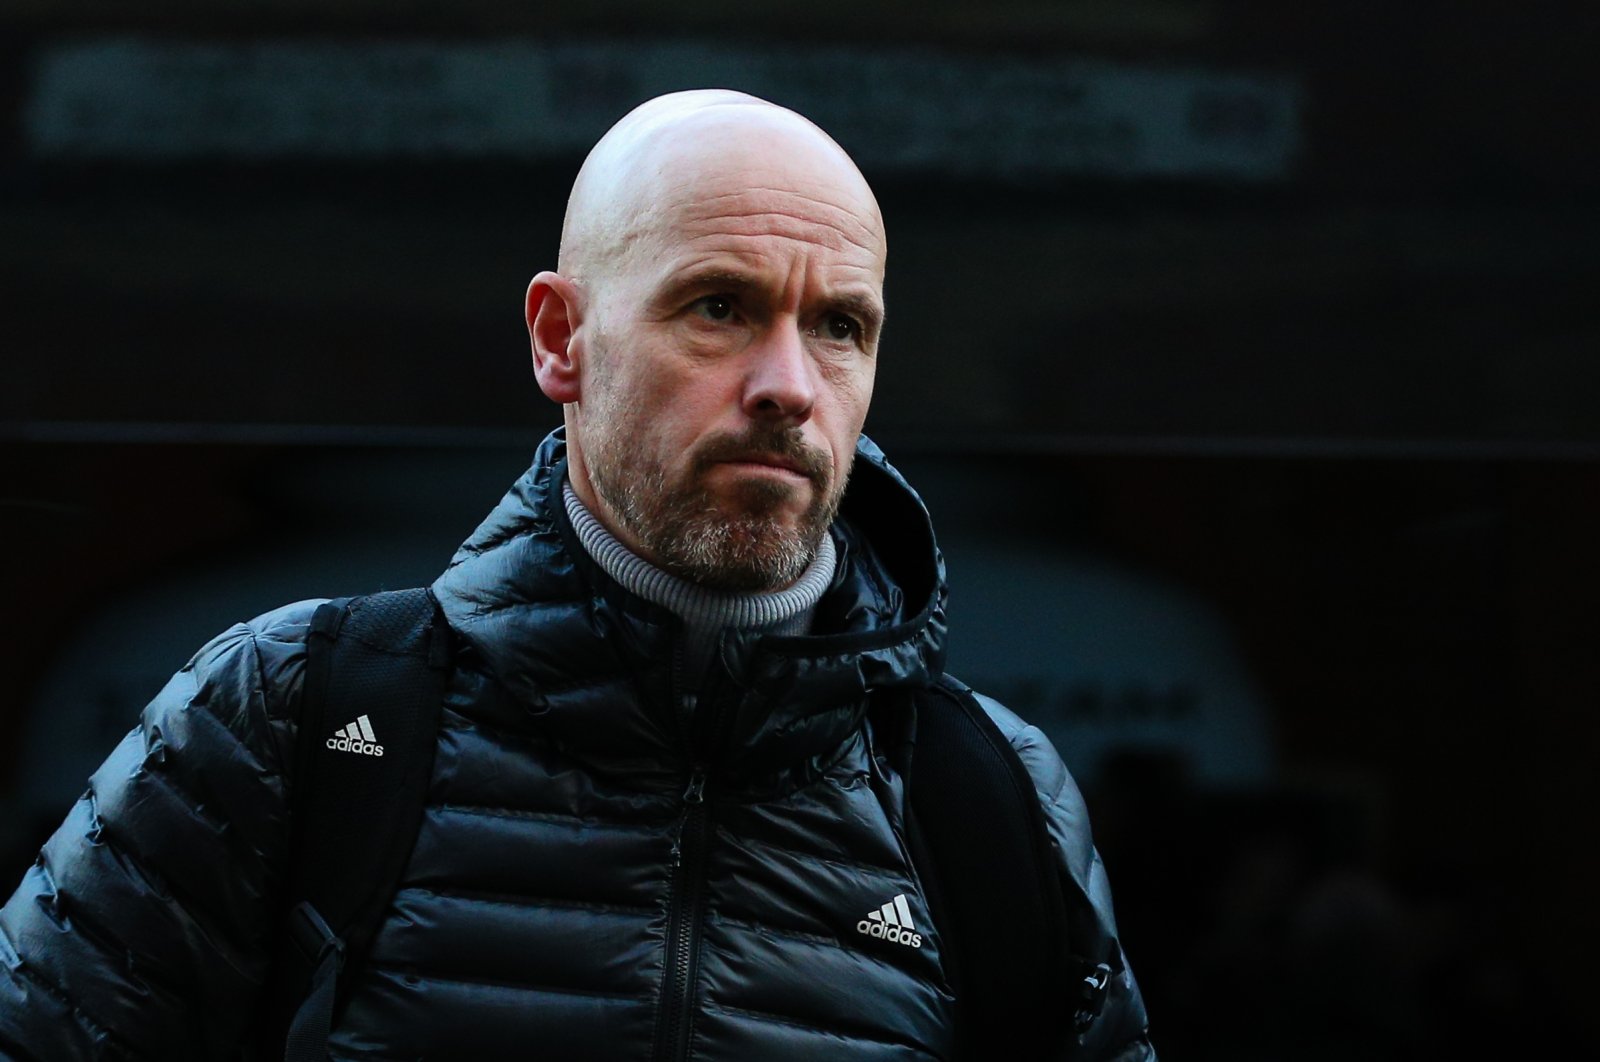 Manchester United manager Erik ten Hag arrives at the ground ahead of the Premier League match between Fulham FC and Manchester United at Craven Cottage, London, United Kingdom, Nov. 13, 2022. (Getty Images Photo)